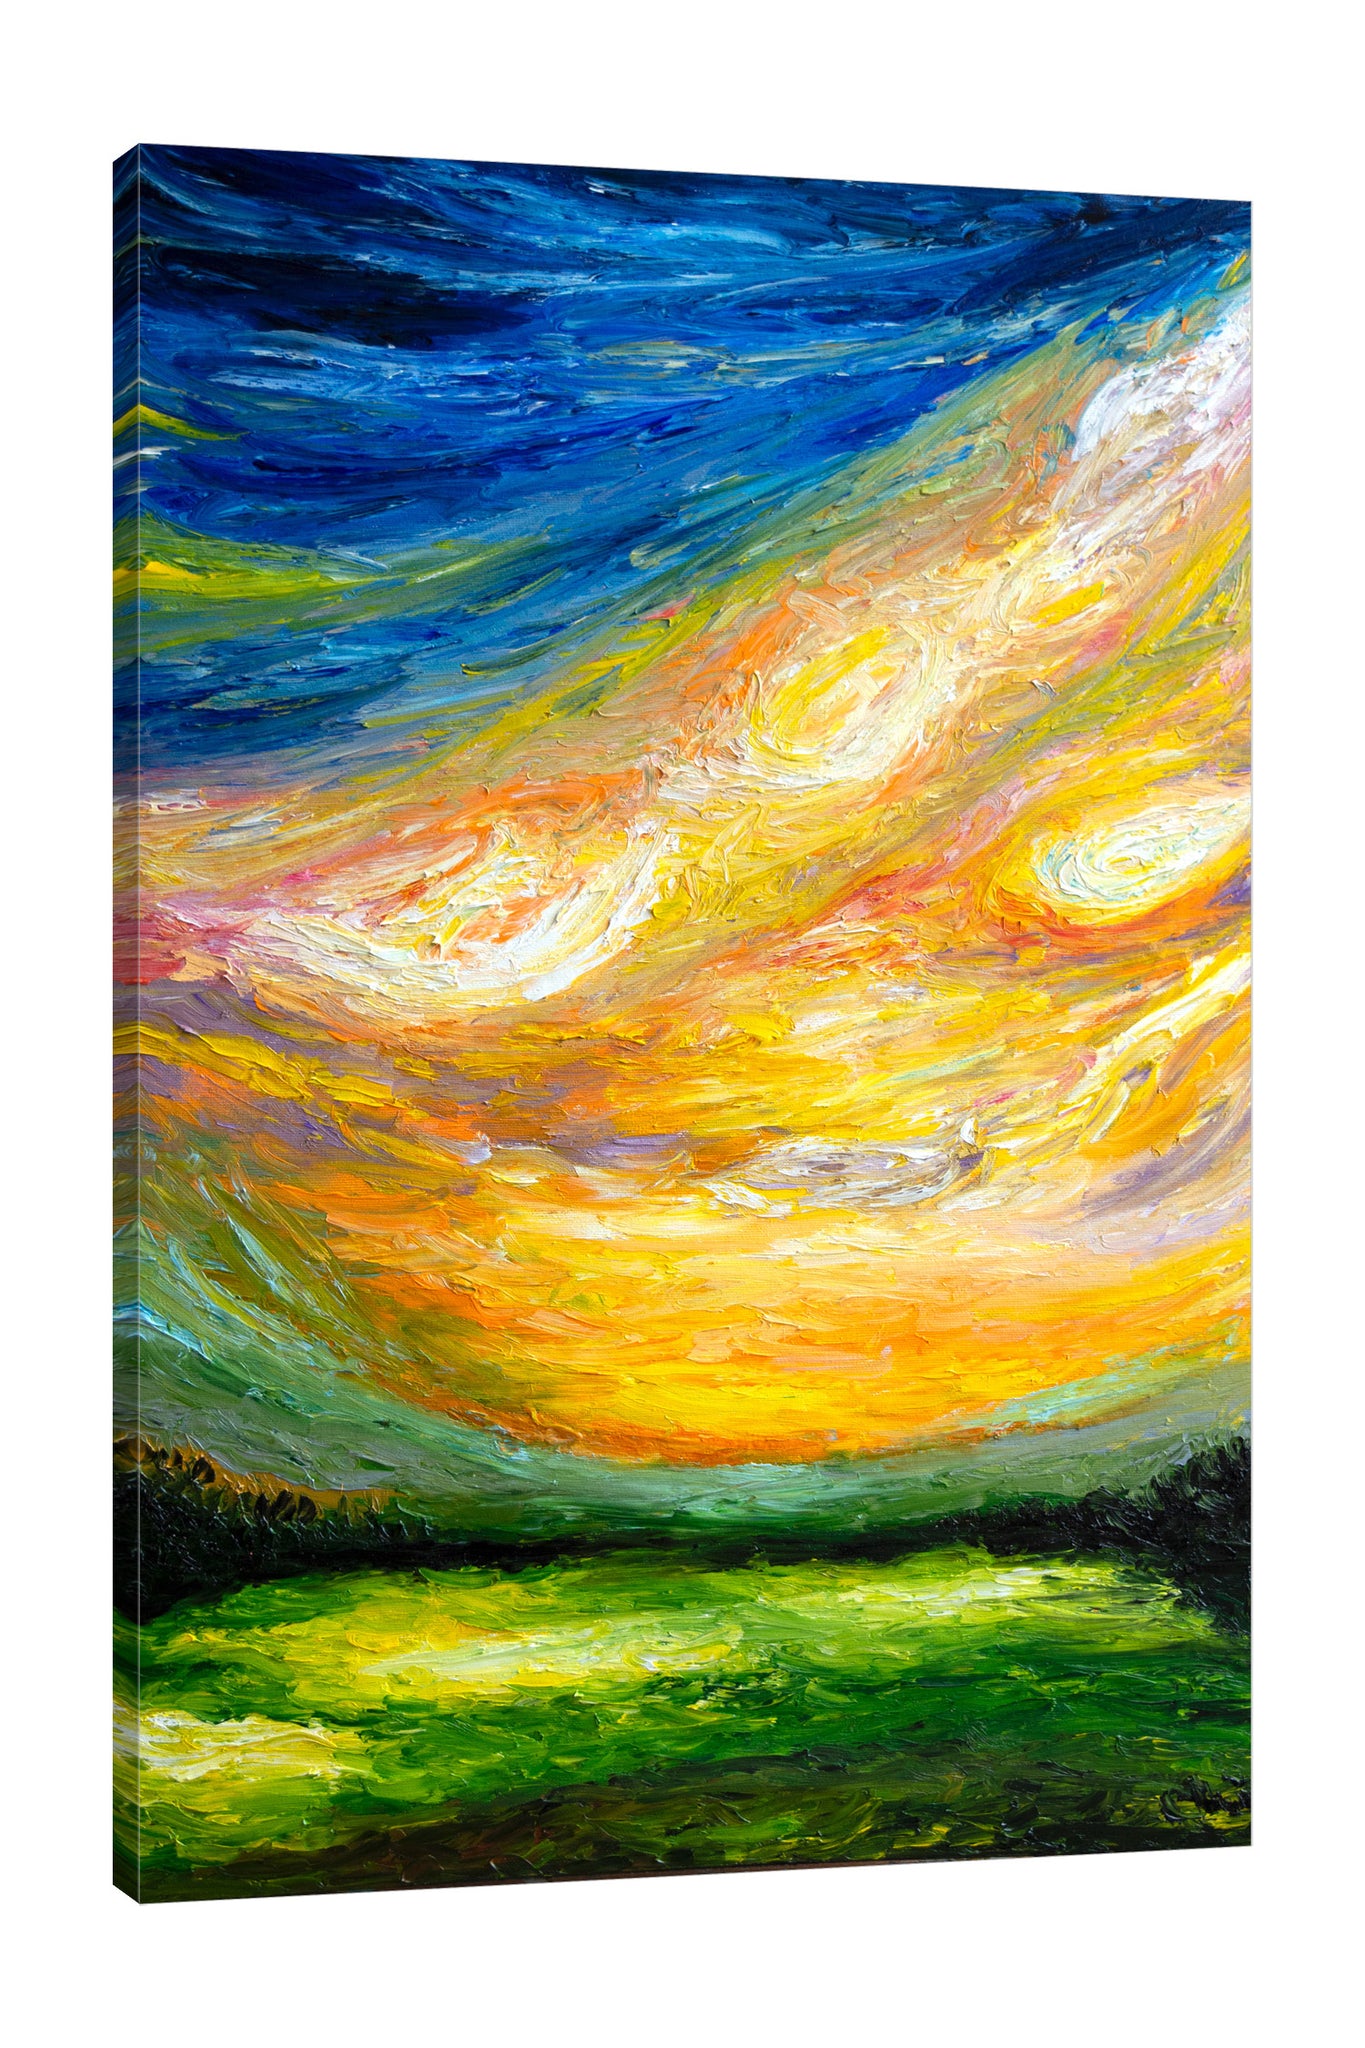 Chiara-Magni,Modern & Contemporary,Landscape & Nature,Finger-paint,abstract,yellow,green,blue,skies,clouds,sunset,white,navy,teal,